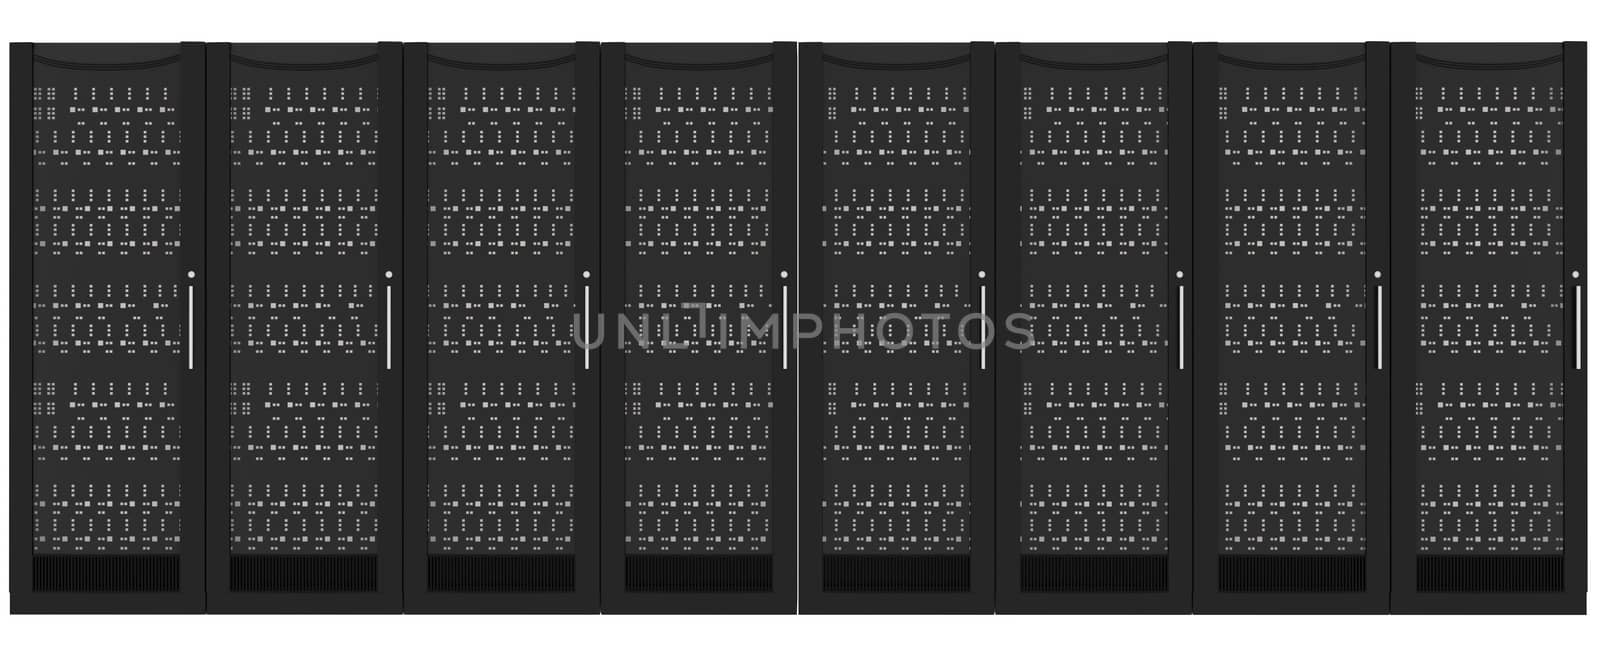 Set of metal lockers on white, front view by cherezoff